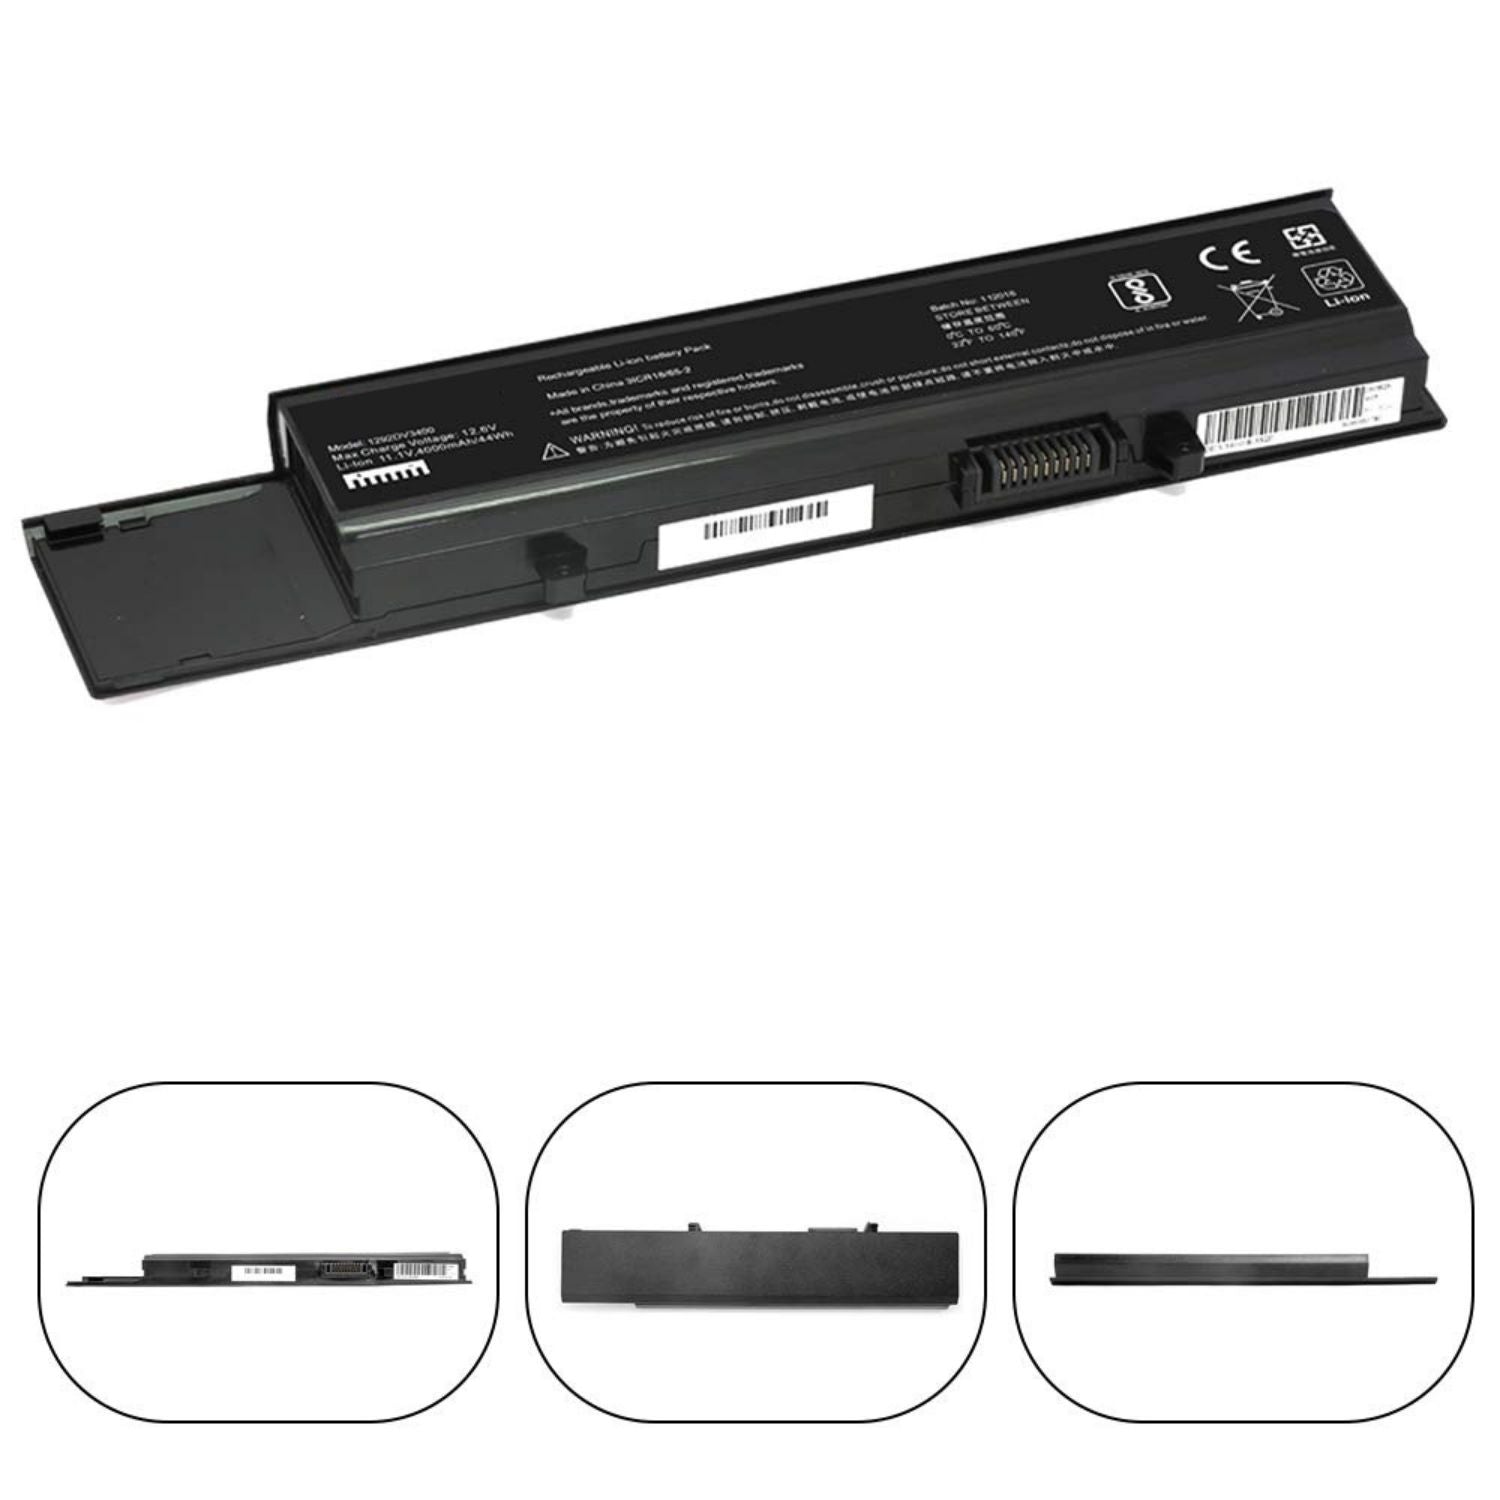 Dell 7FJ92 Battery For Vostro 3400 3500 3700 P/N  Y5XF9 CYDWV Y5XF9 7FJ92 4JK6R 04D3C 312-0997 312-0998 004D3C 004GN0G 04GN0G 04JK6R 07FJ92 0TXWRR CYDWV TXWRR TY3P4 312-0997 312-0998 Series Laptop's.